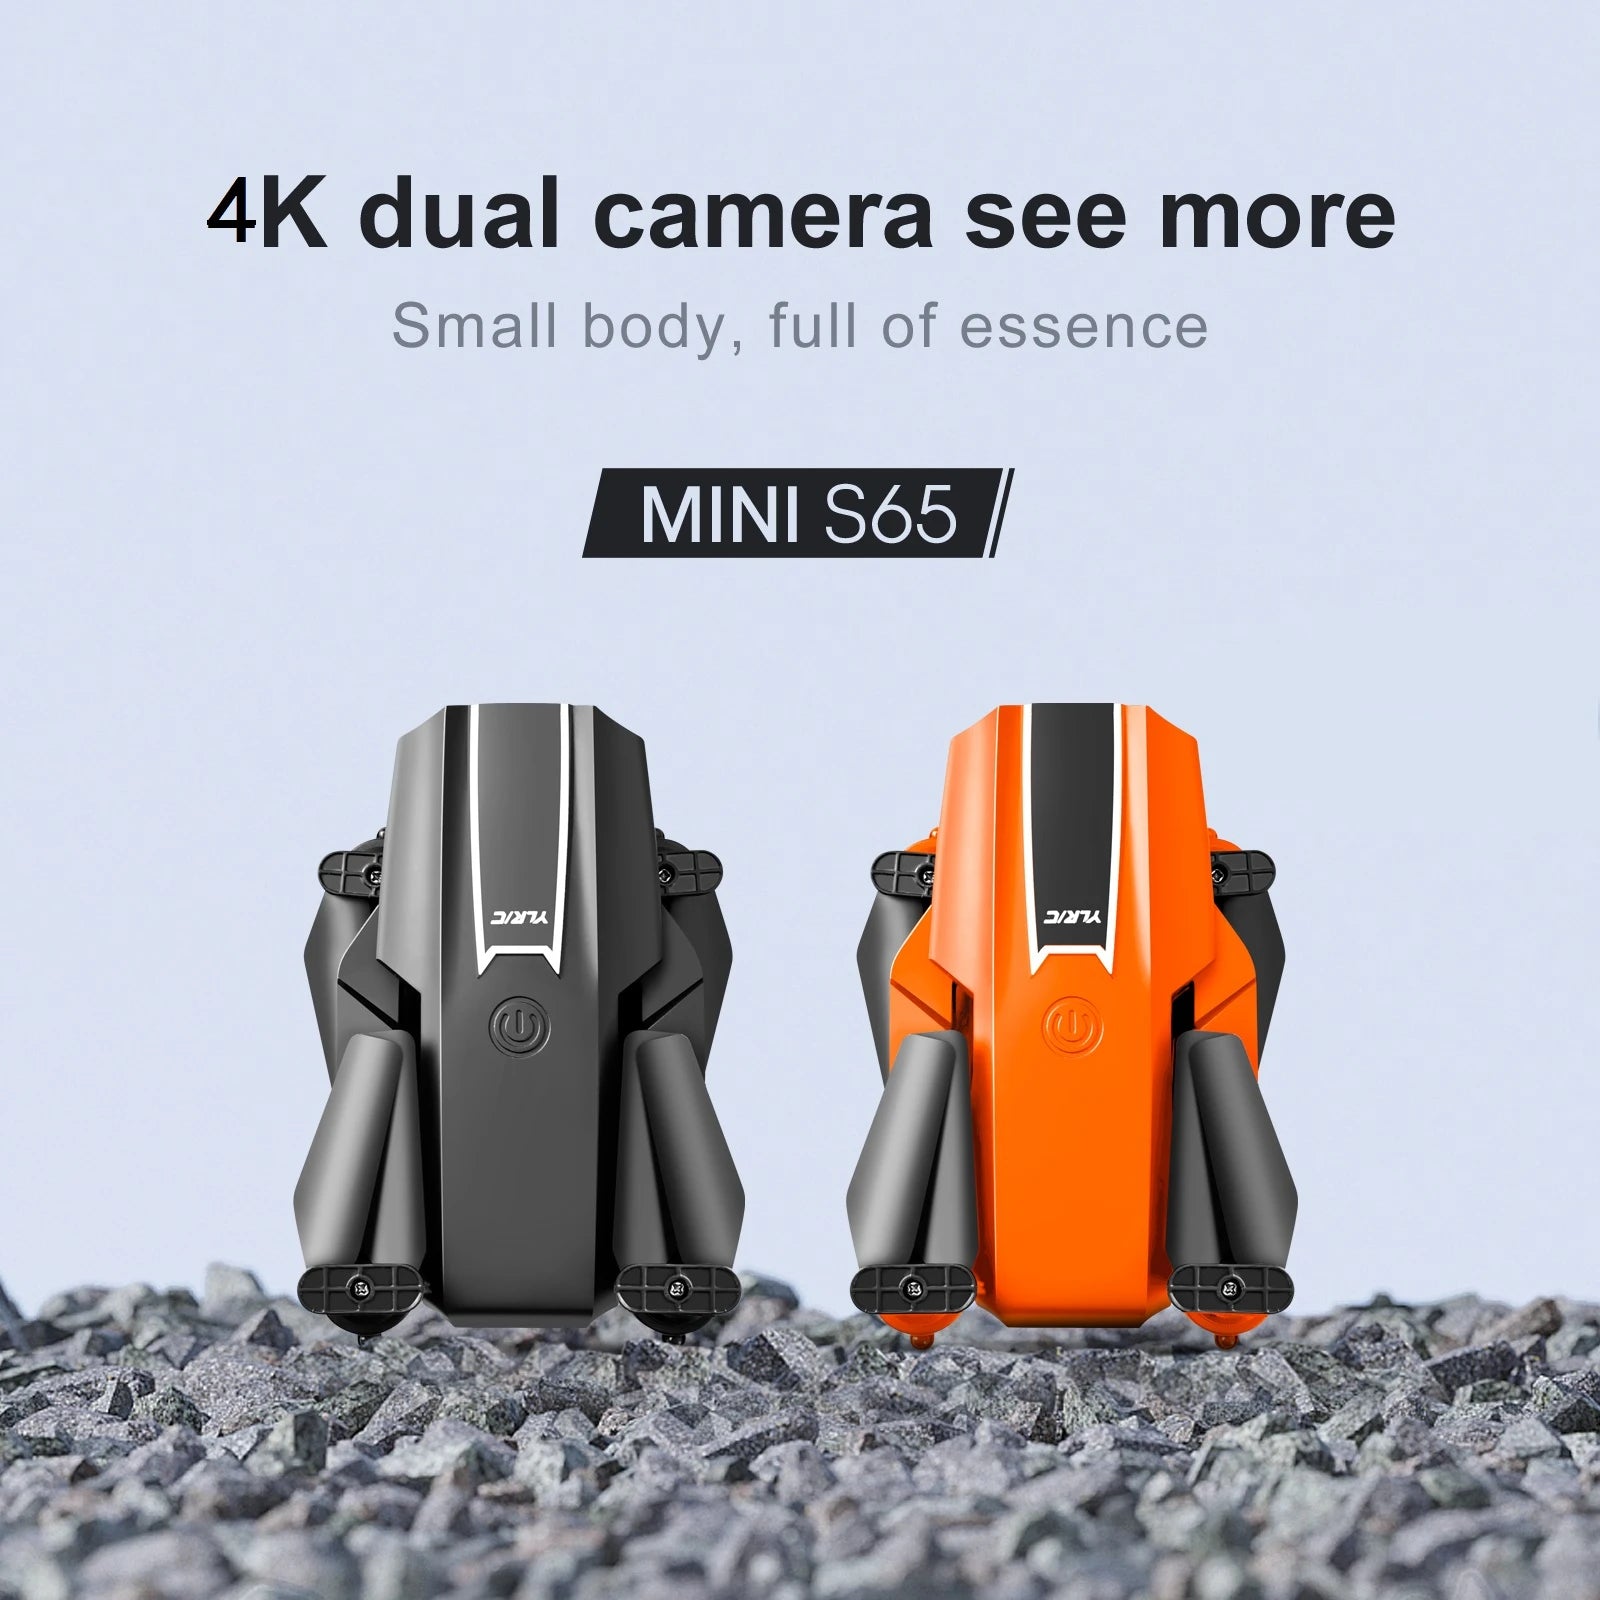 lightweight and safe: mini, lightweight and easy to carry